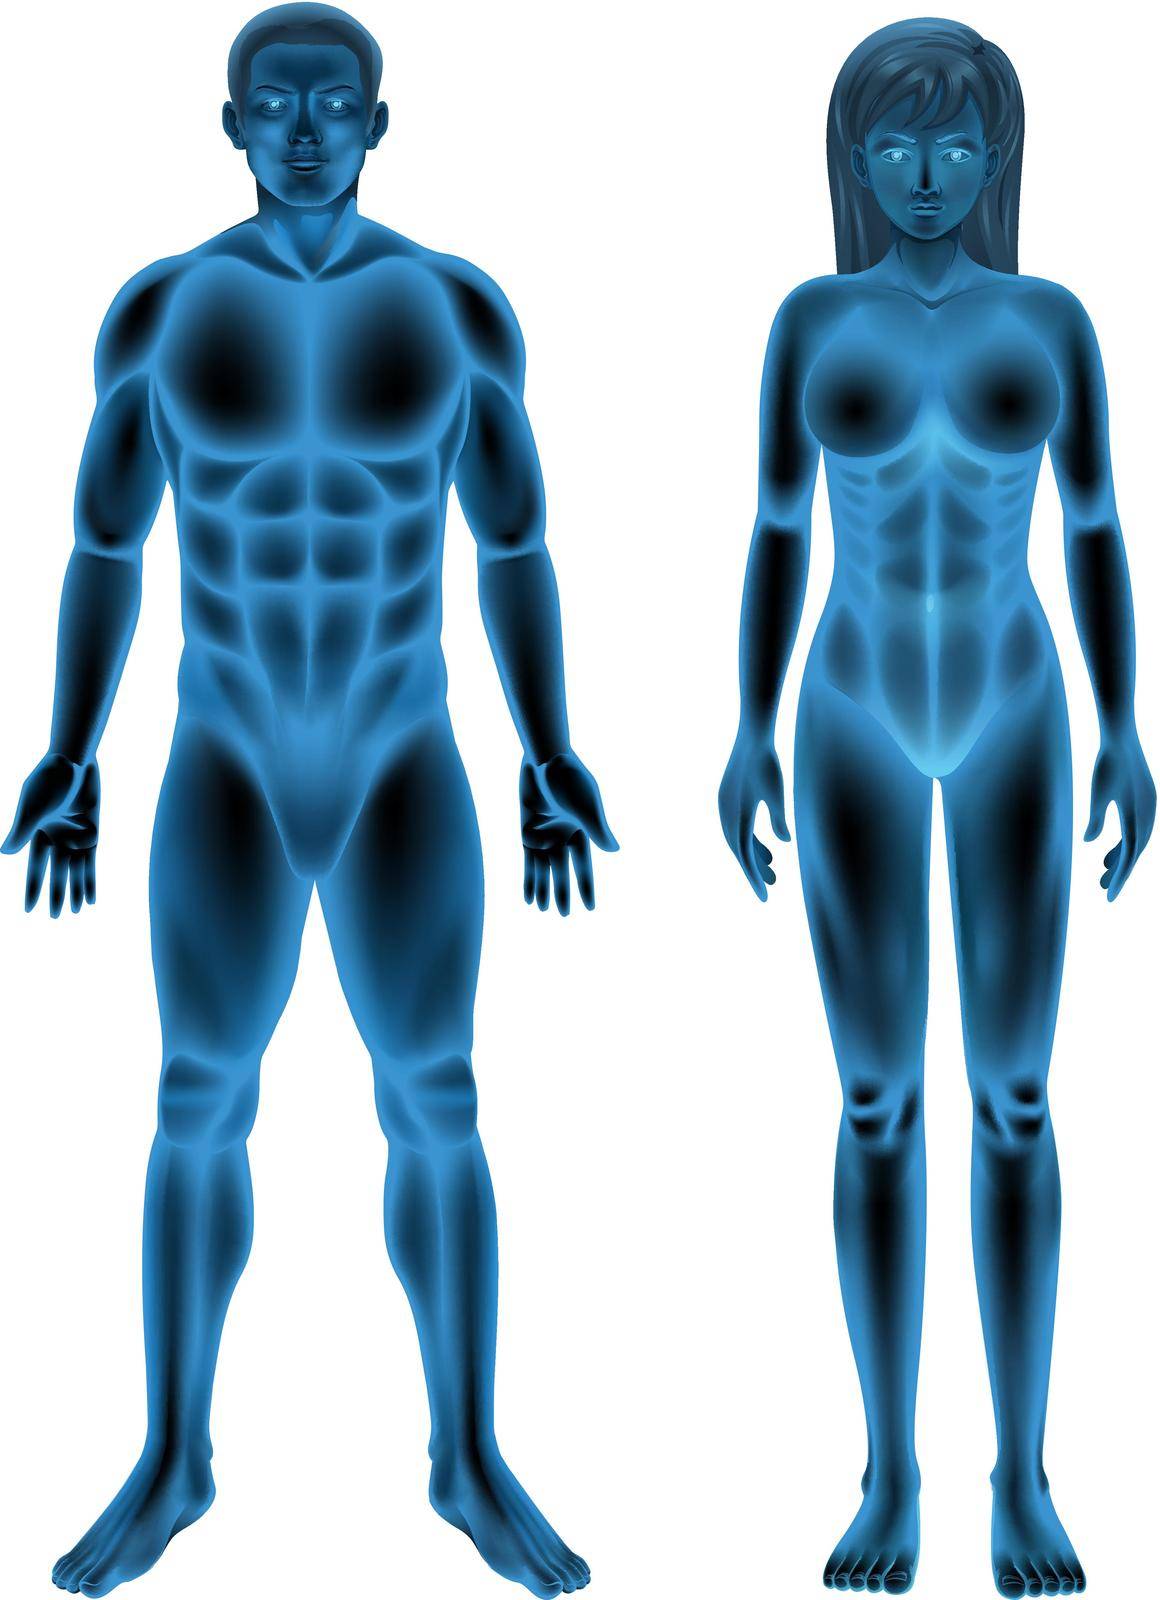 Illustration of the male and female human body